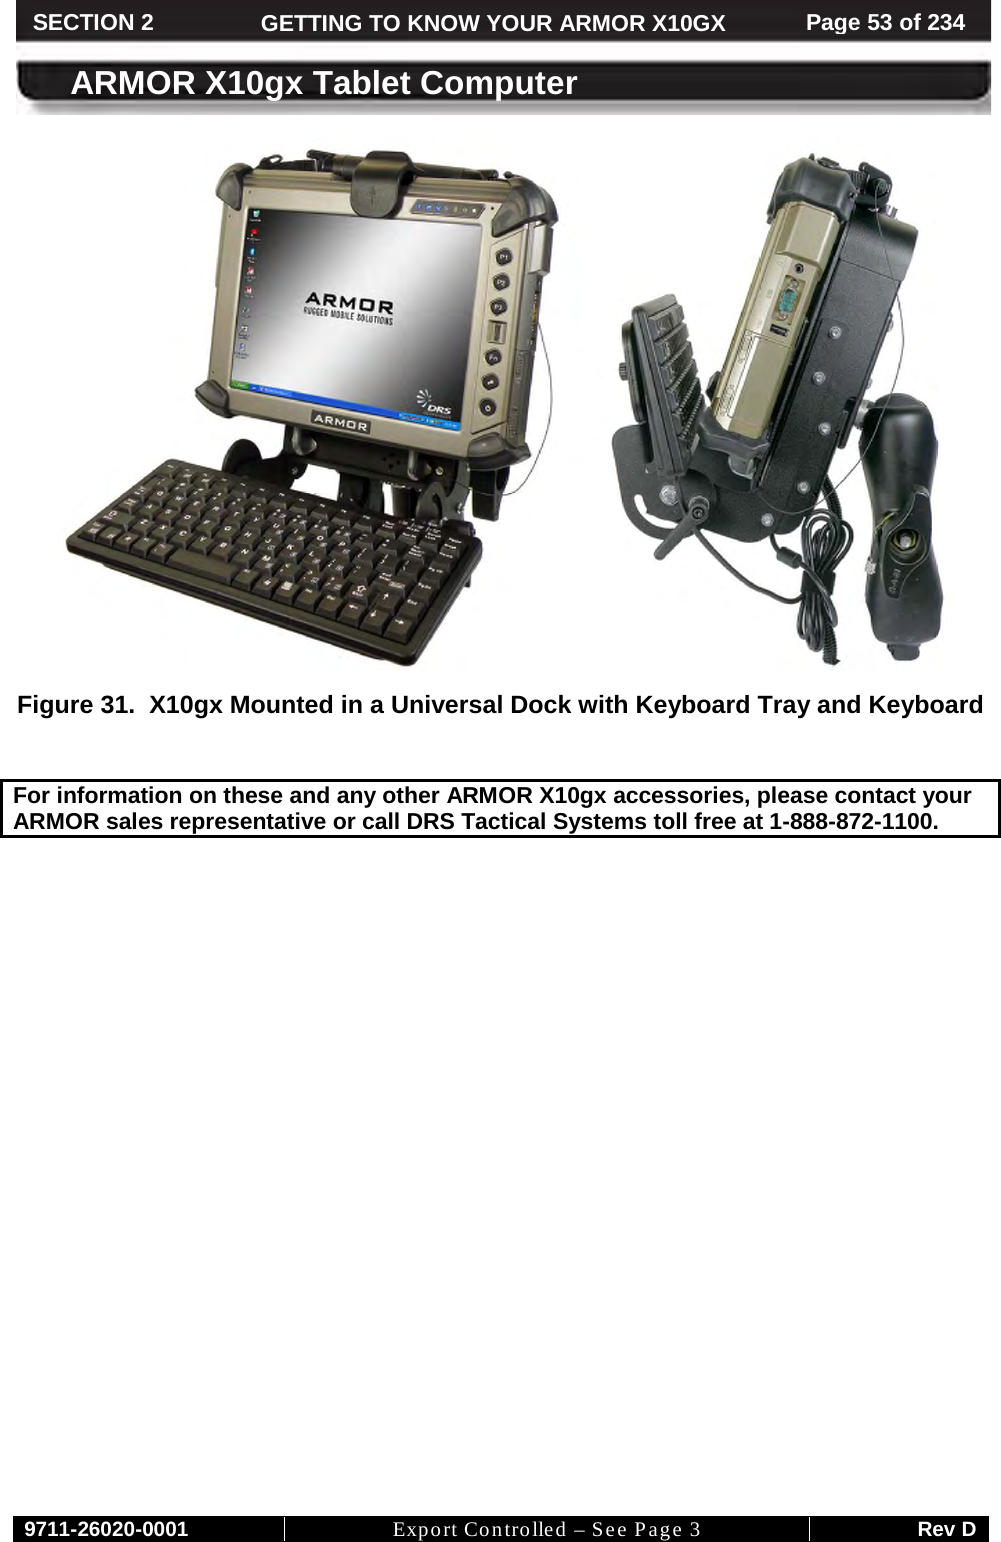     9711-26020-0001 Export Controlled – See Page 3 Rev D SECTION 2 GETTING TO KNOW YOUR ARMOR X10GX Page 53 of 234  ARMOR X10gx Tablet Computer  Figure 31.  X10gx Mounted in a Universal Dock with Keyboard Tray and Keyboard   For information on these and any other ARMOR X10gx accessories, please contact your ARMOR sales representative or call DRS Tactical Systems toll free at 1-888-872-1100.                            